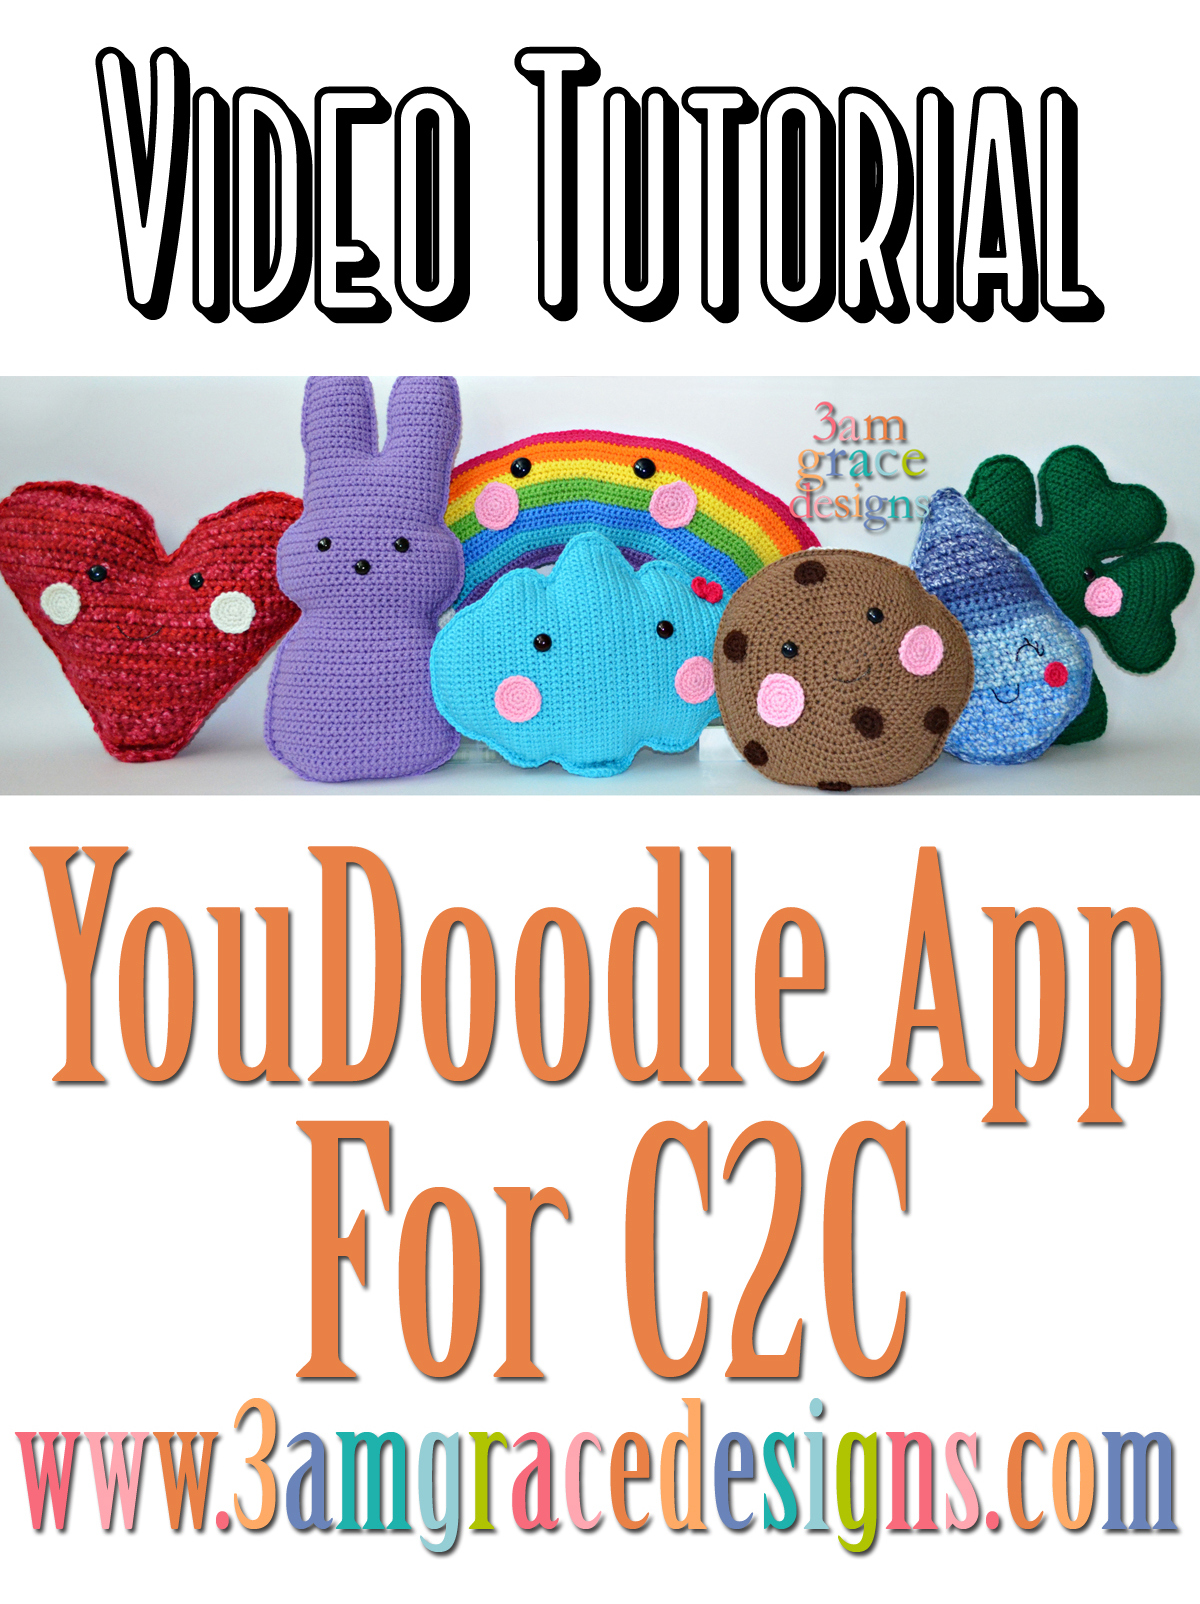 How To: YouDoodle App for C2C